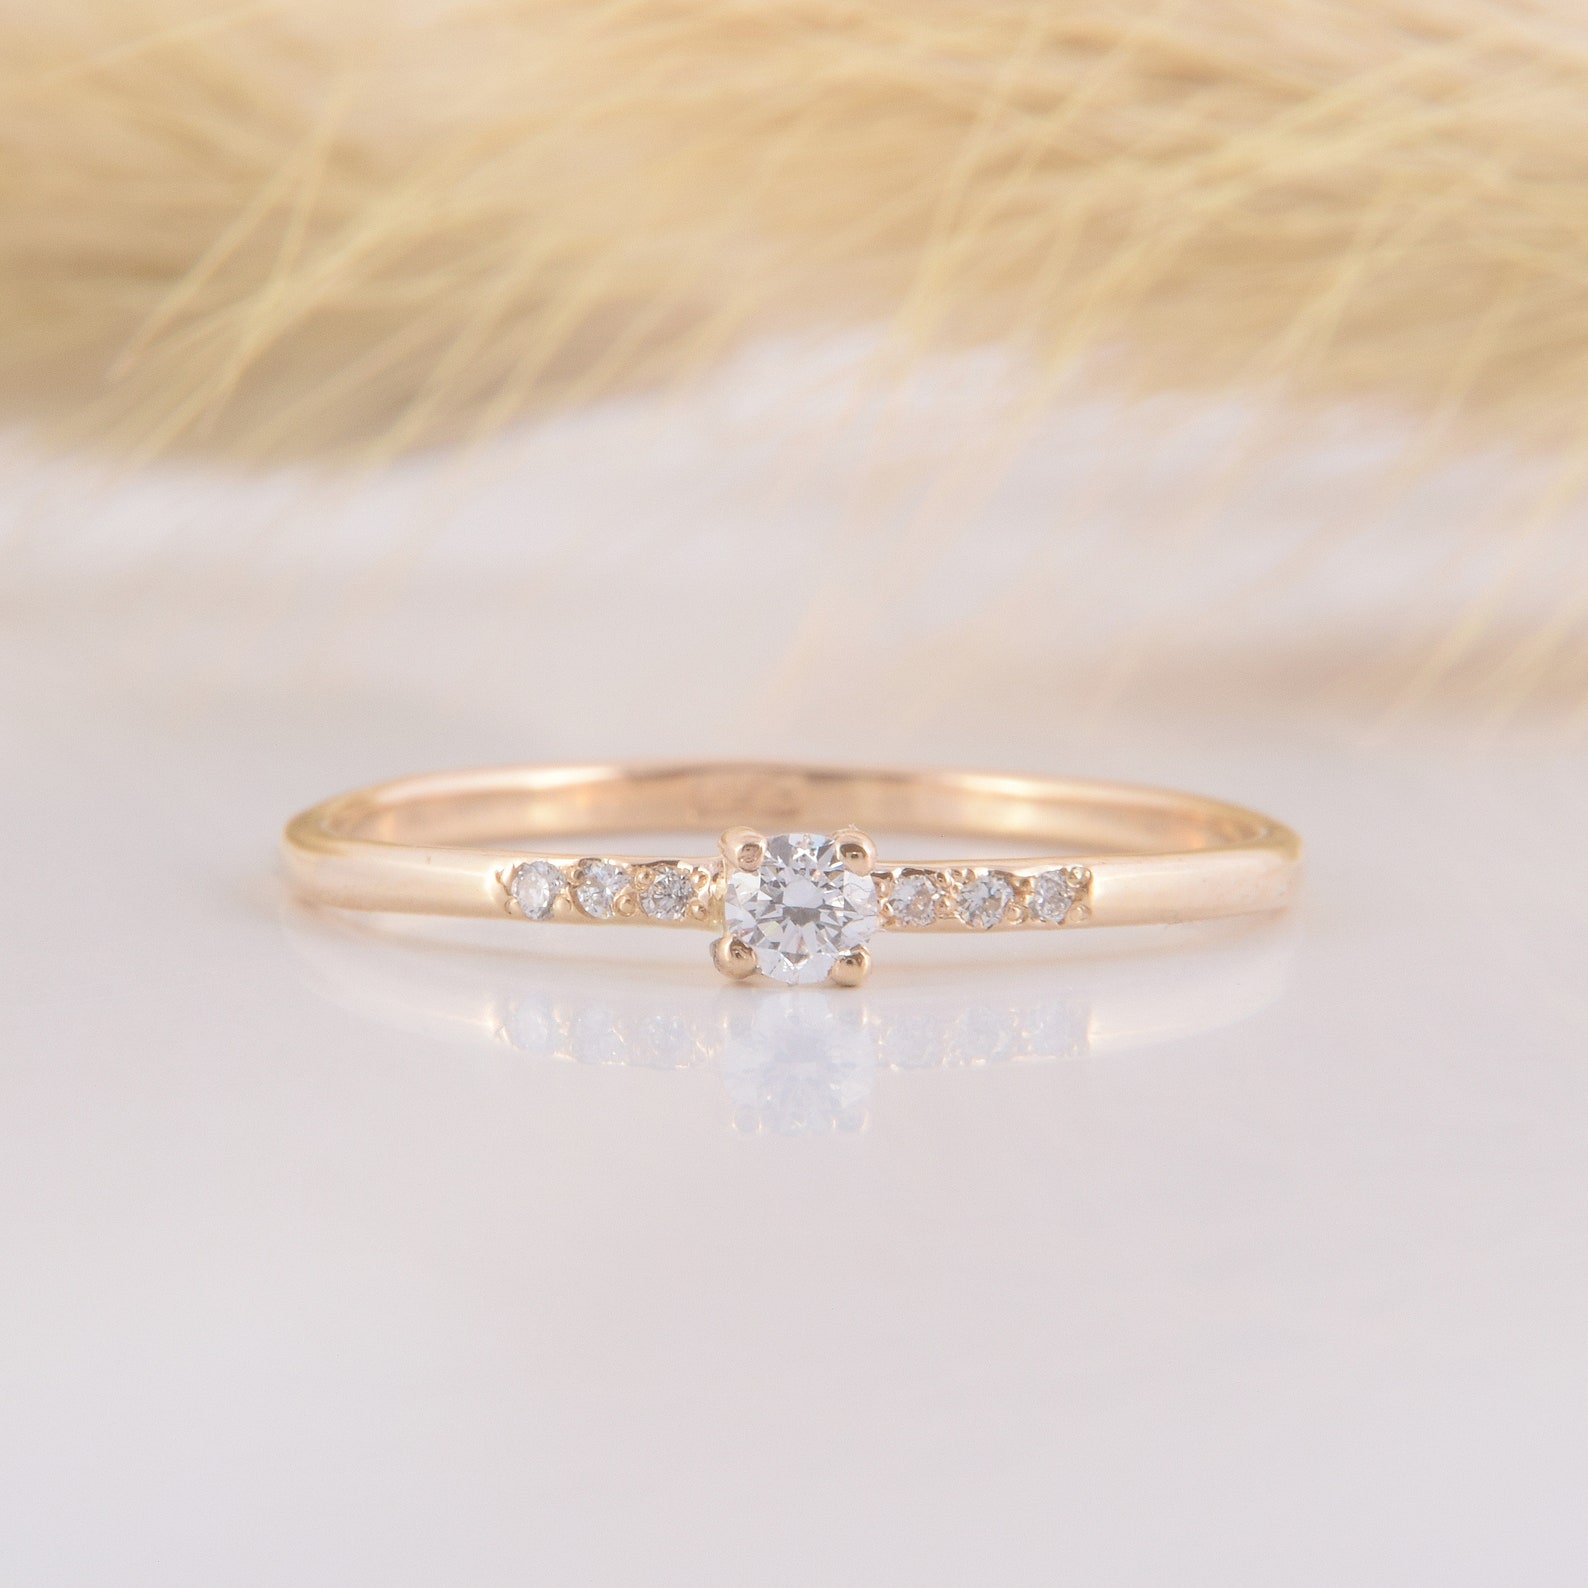 Small & Dainty 14k Yellow Gold Promise Ring for Her Unique | Etsy